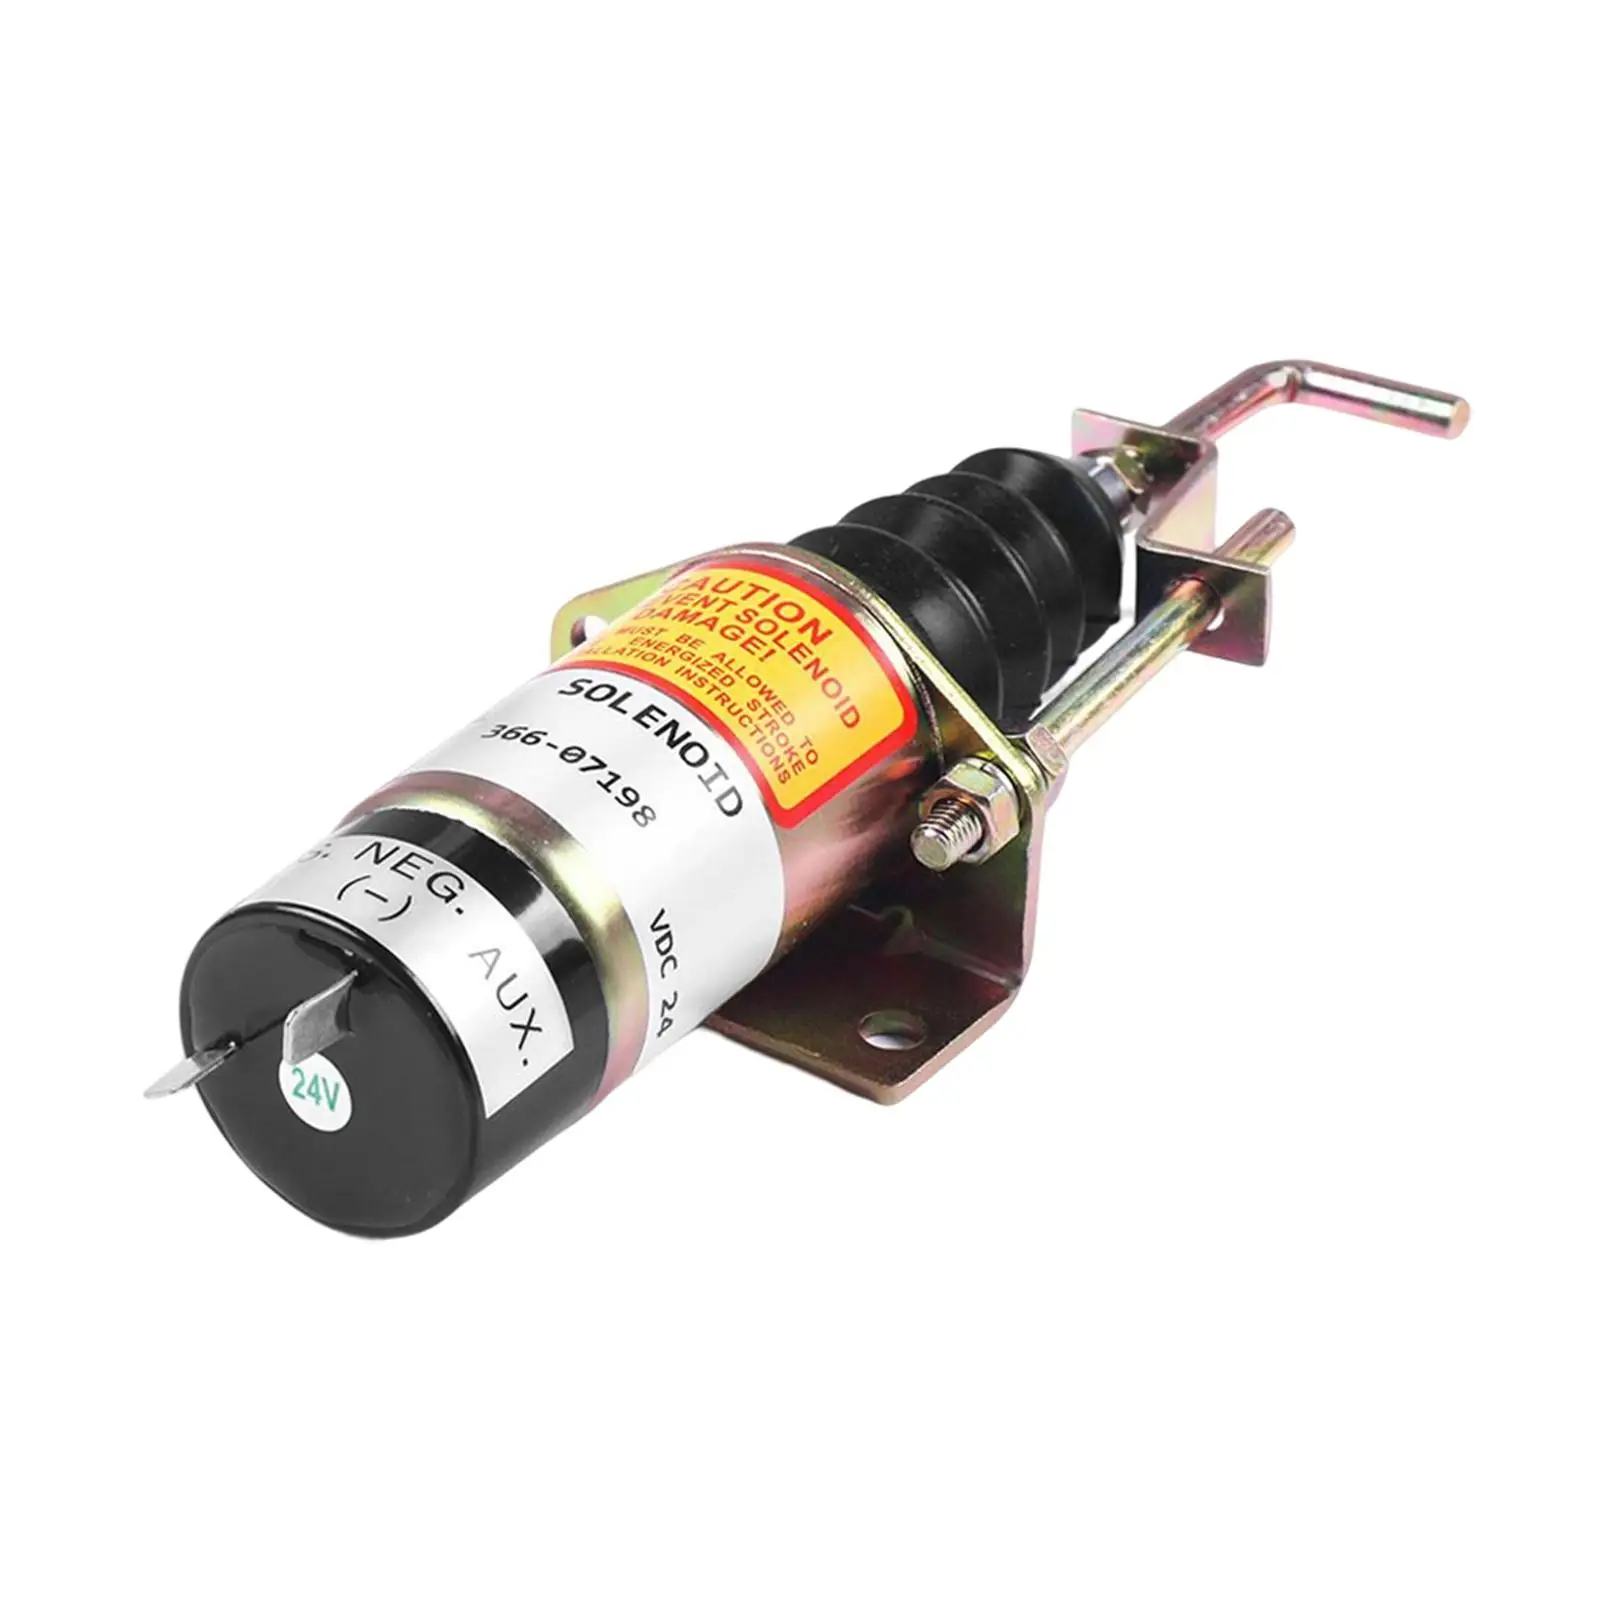 Fuel Shut Off Solenoid 24V 1502-24C7U2B2S1 for Lister Petter Engine with Bracket Professional High Performance Spare Parts